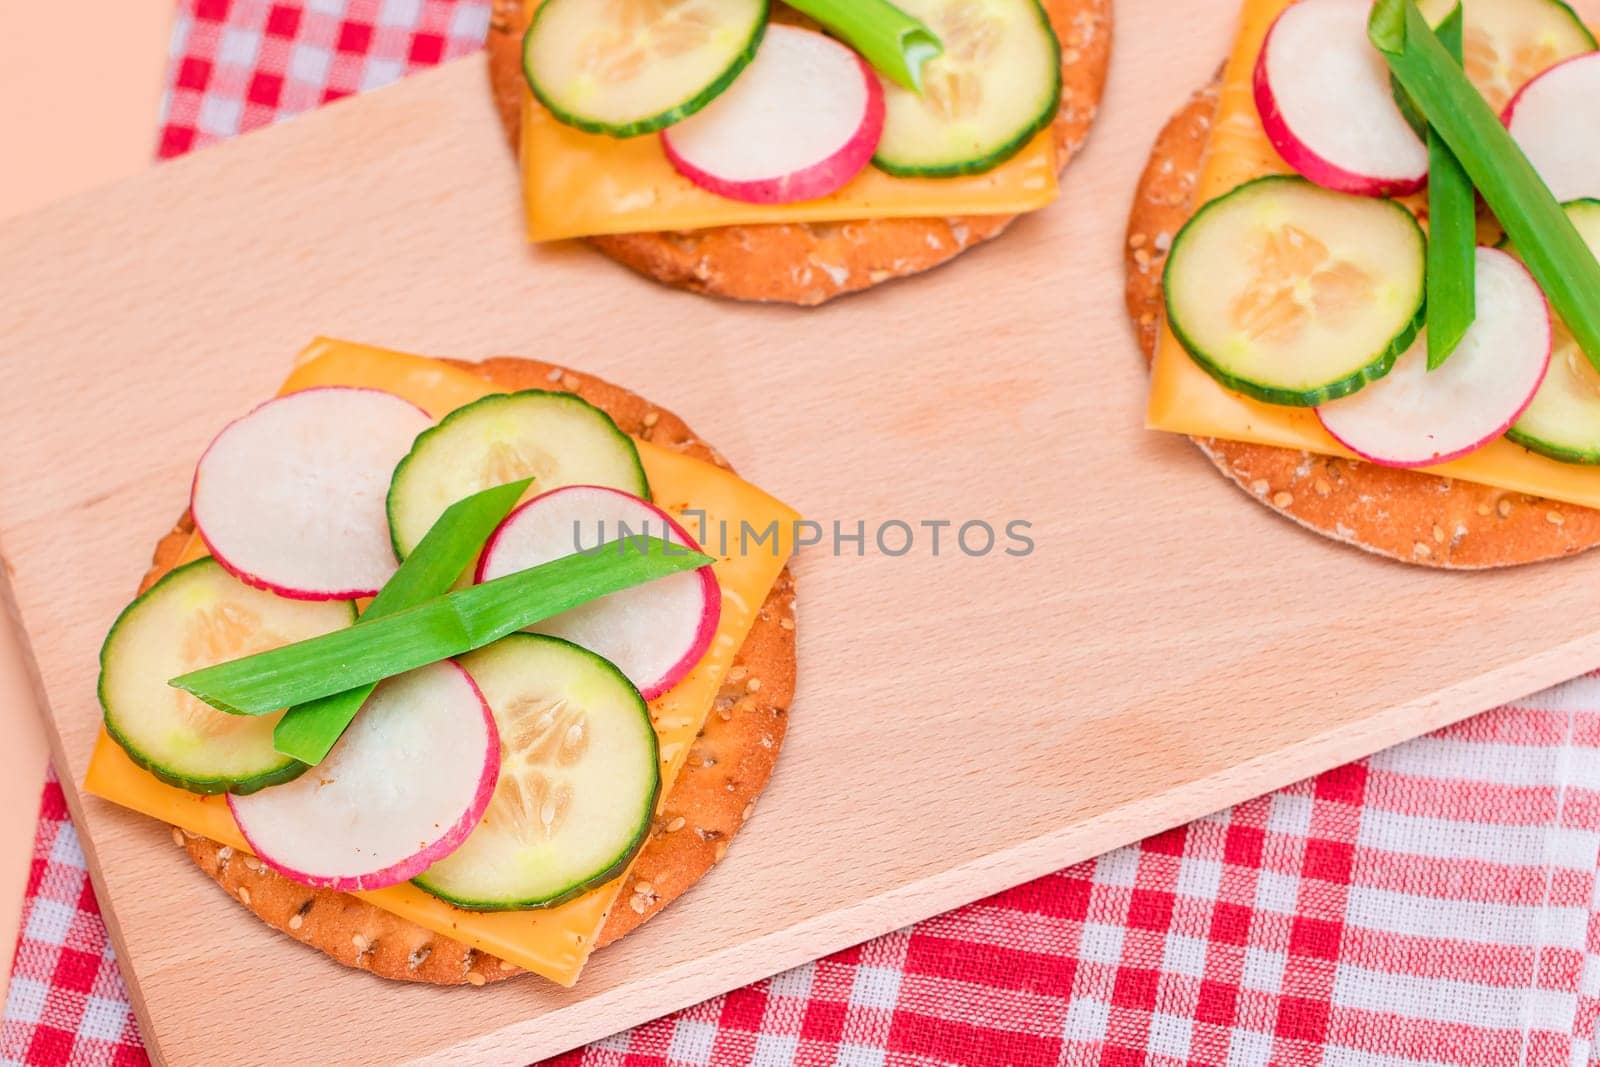 Light Breakfast. Quick and Healthy Sandwich. Fresh Cucumber and Radish with Green Onions and Cheese on Crispy Cracker on Wooden Cutting Board